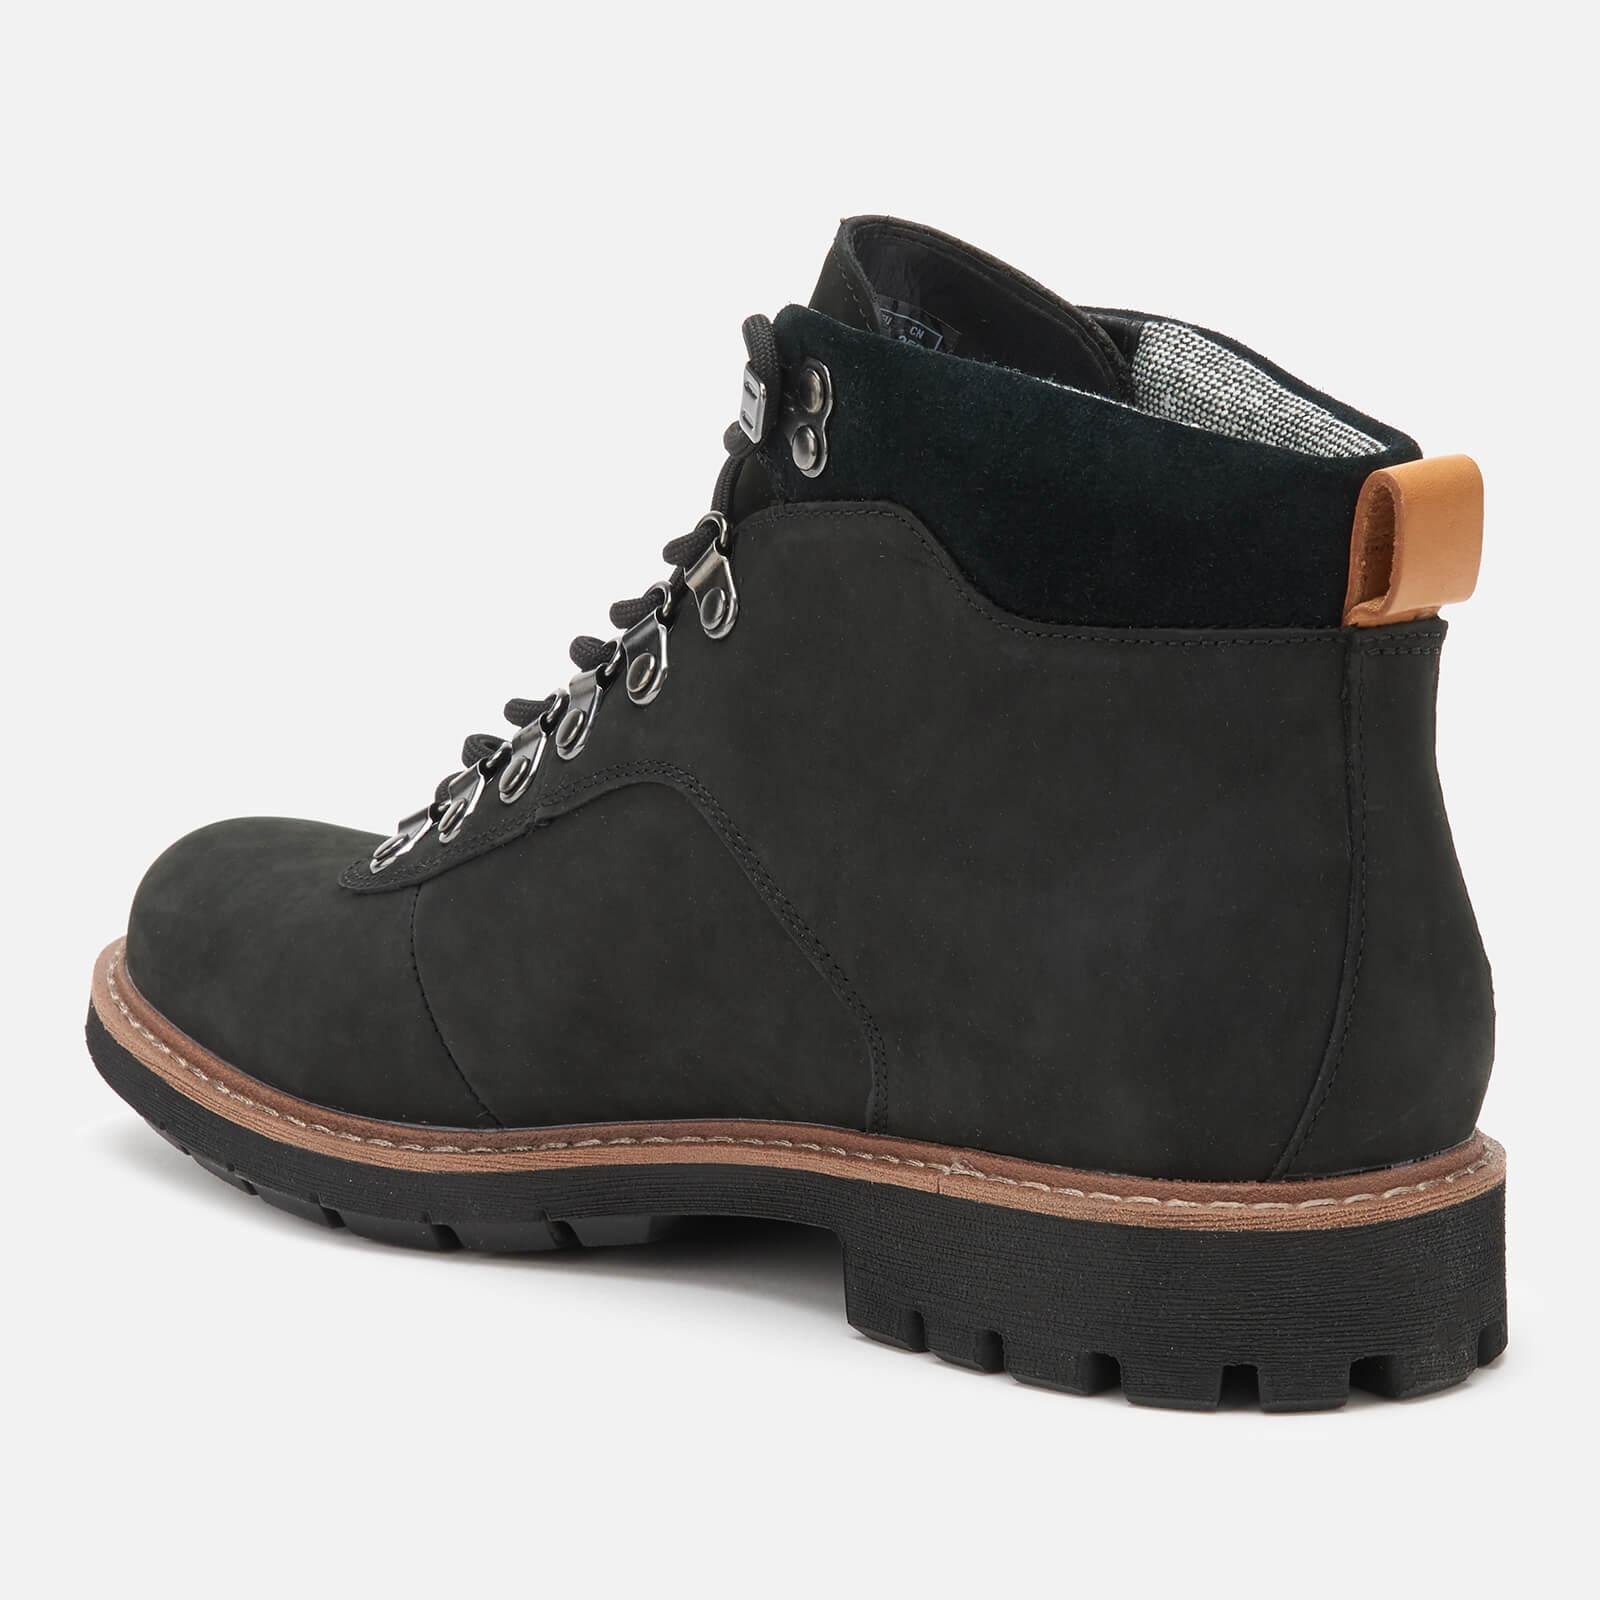 Clarks Lace Batcombe Alp Gore-tex Nubuck Hiking Style Boots in Black ...